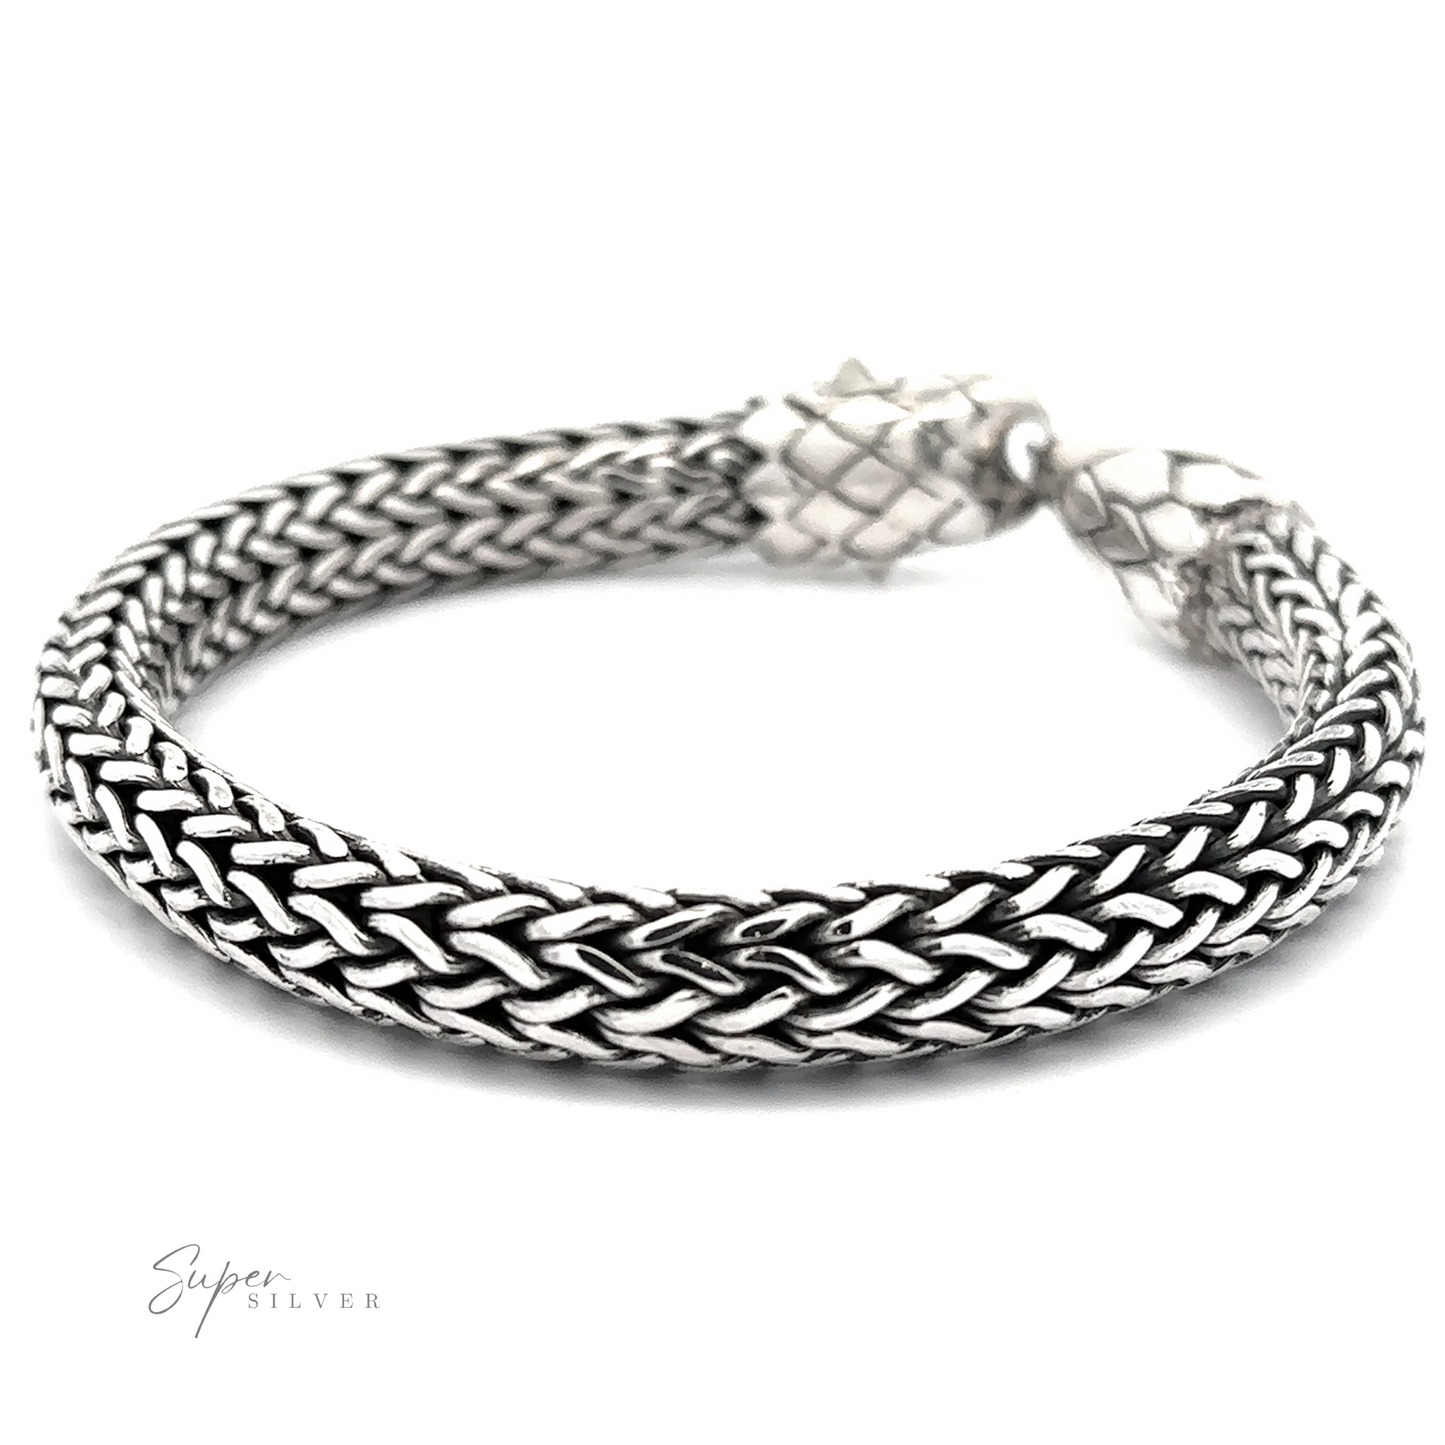 
                  
                    A Heavy Braided Bracelet with Eagle Clasp with a detailed eagle head clasp and a textured design is displayed on a plain background. The brand name "Super Silver" is present in the corner, showcasing the .925 Sterling Silver craftsmanship.
                  
                